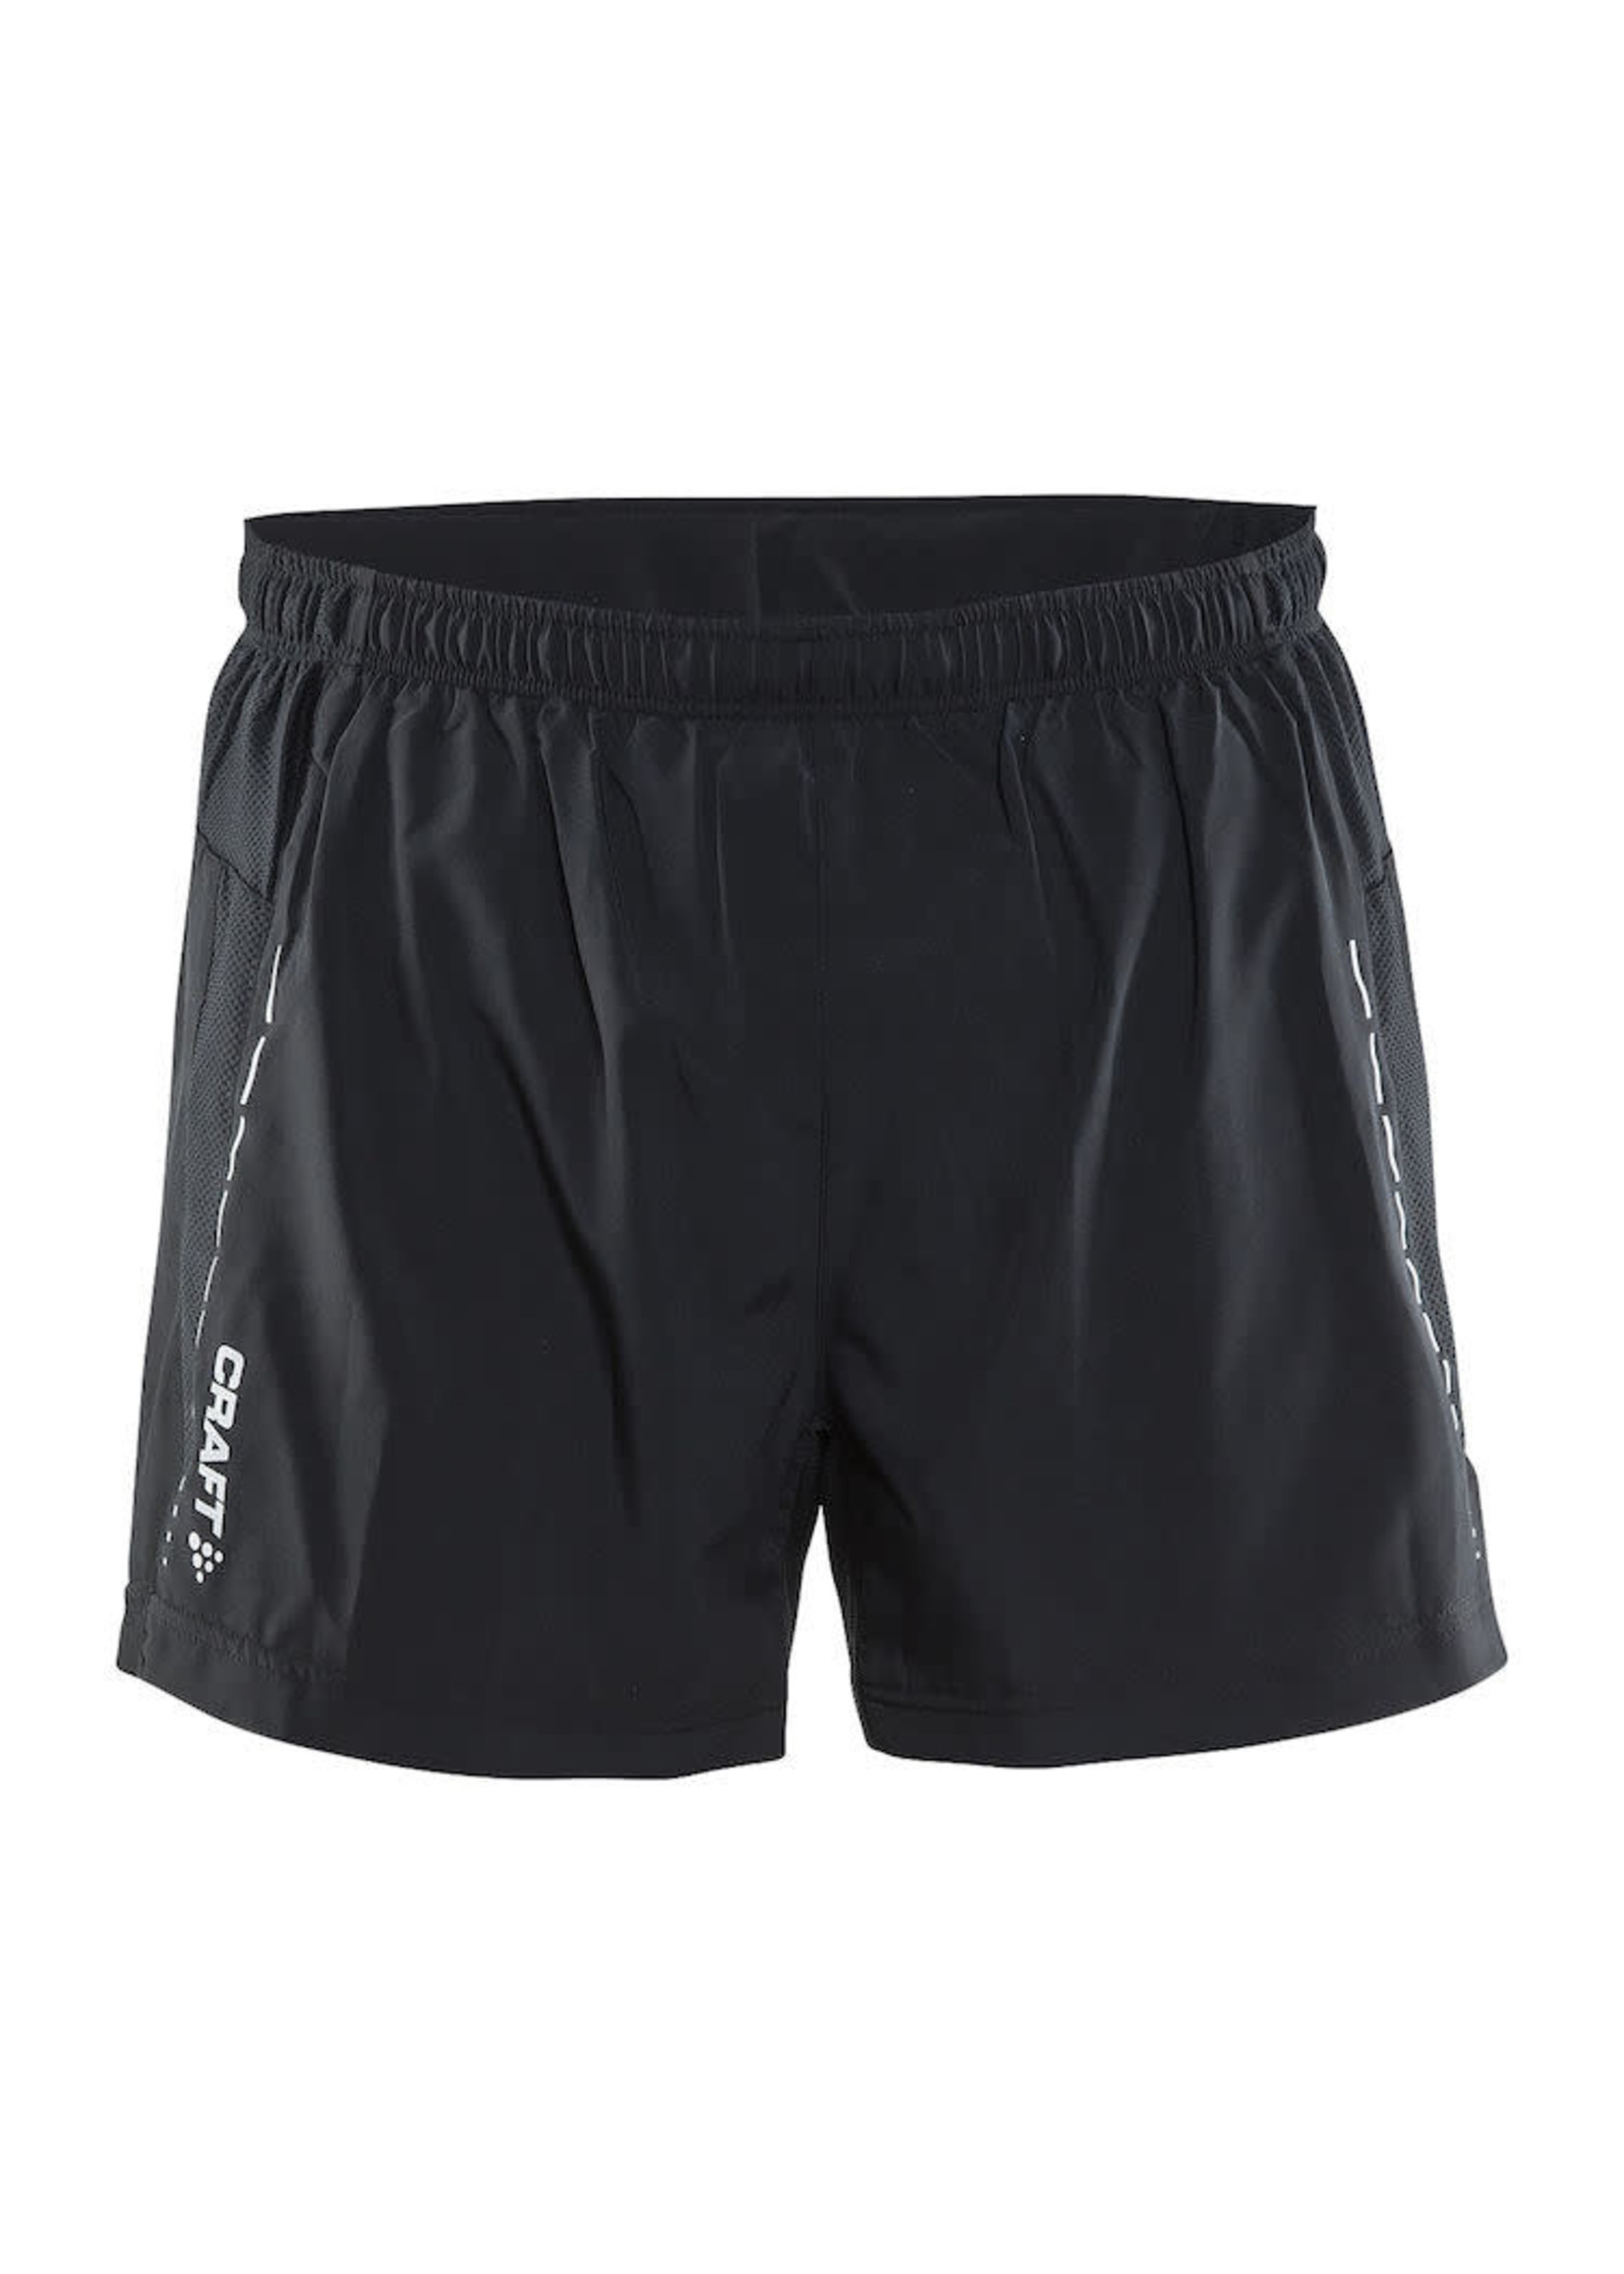 Craft Shorts Essential 5 inch pour hommes